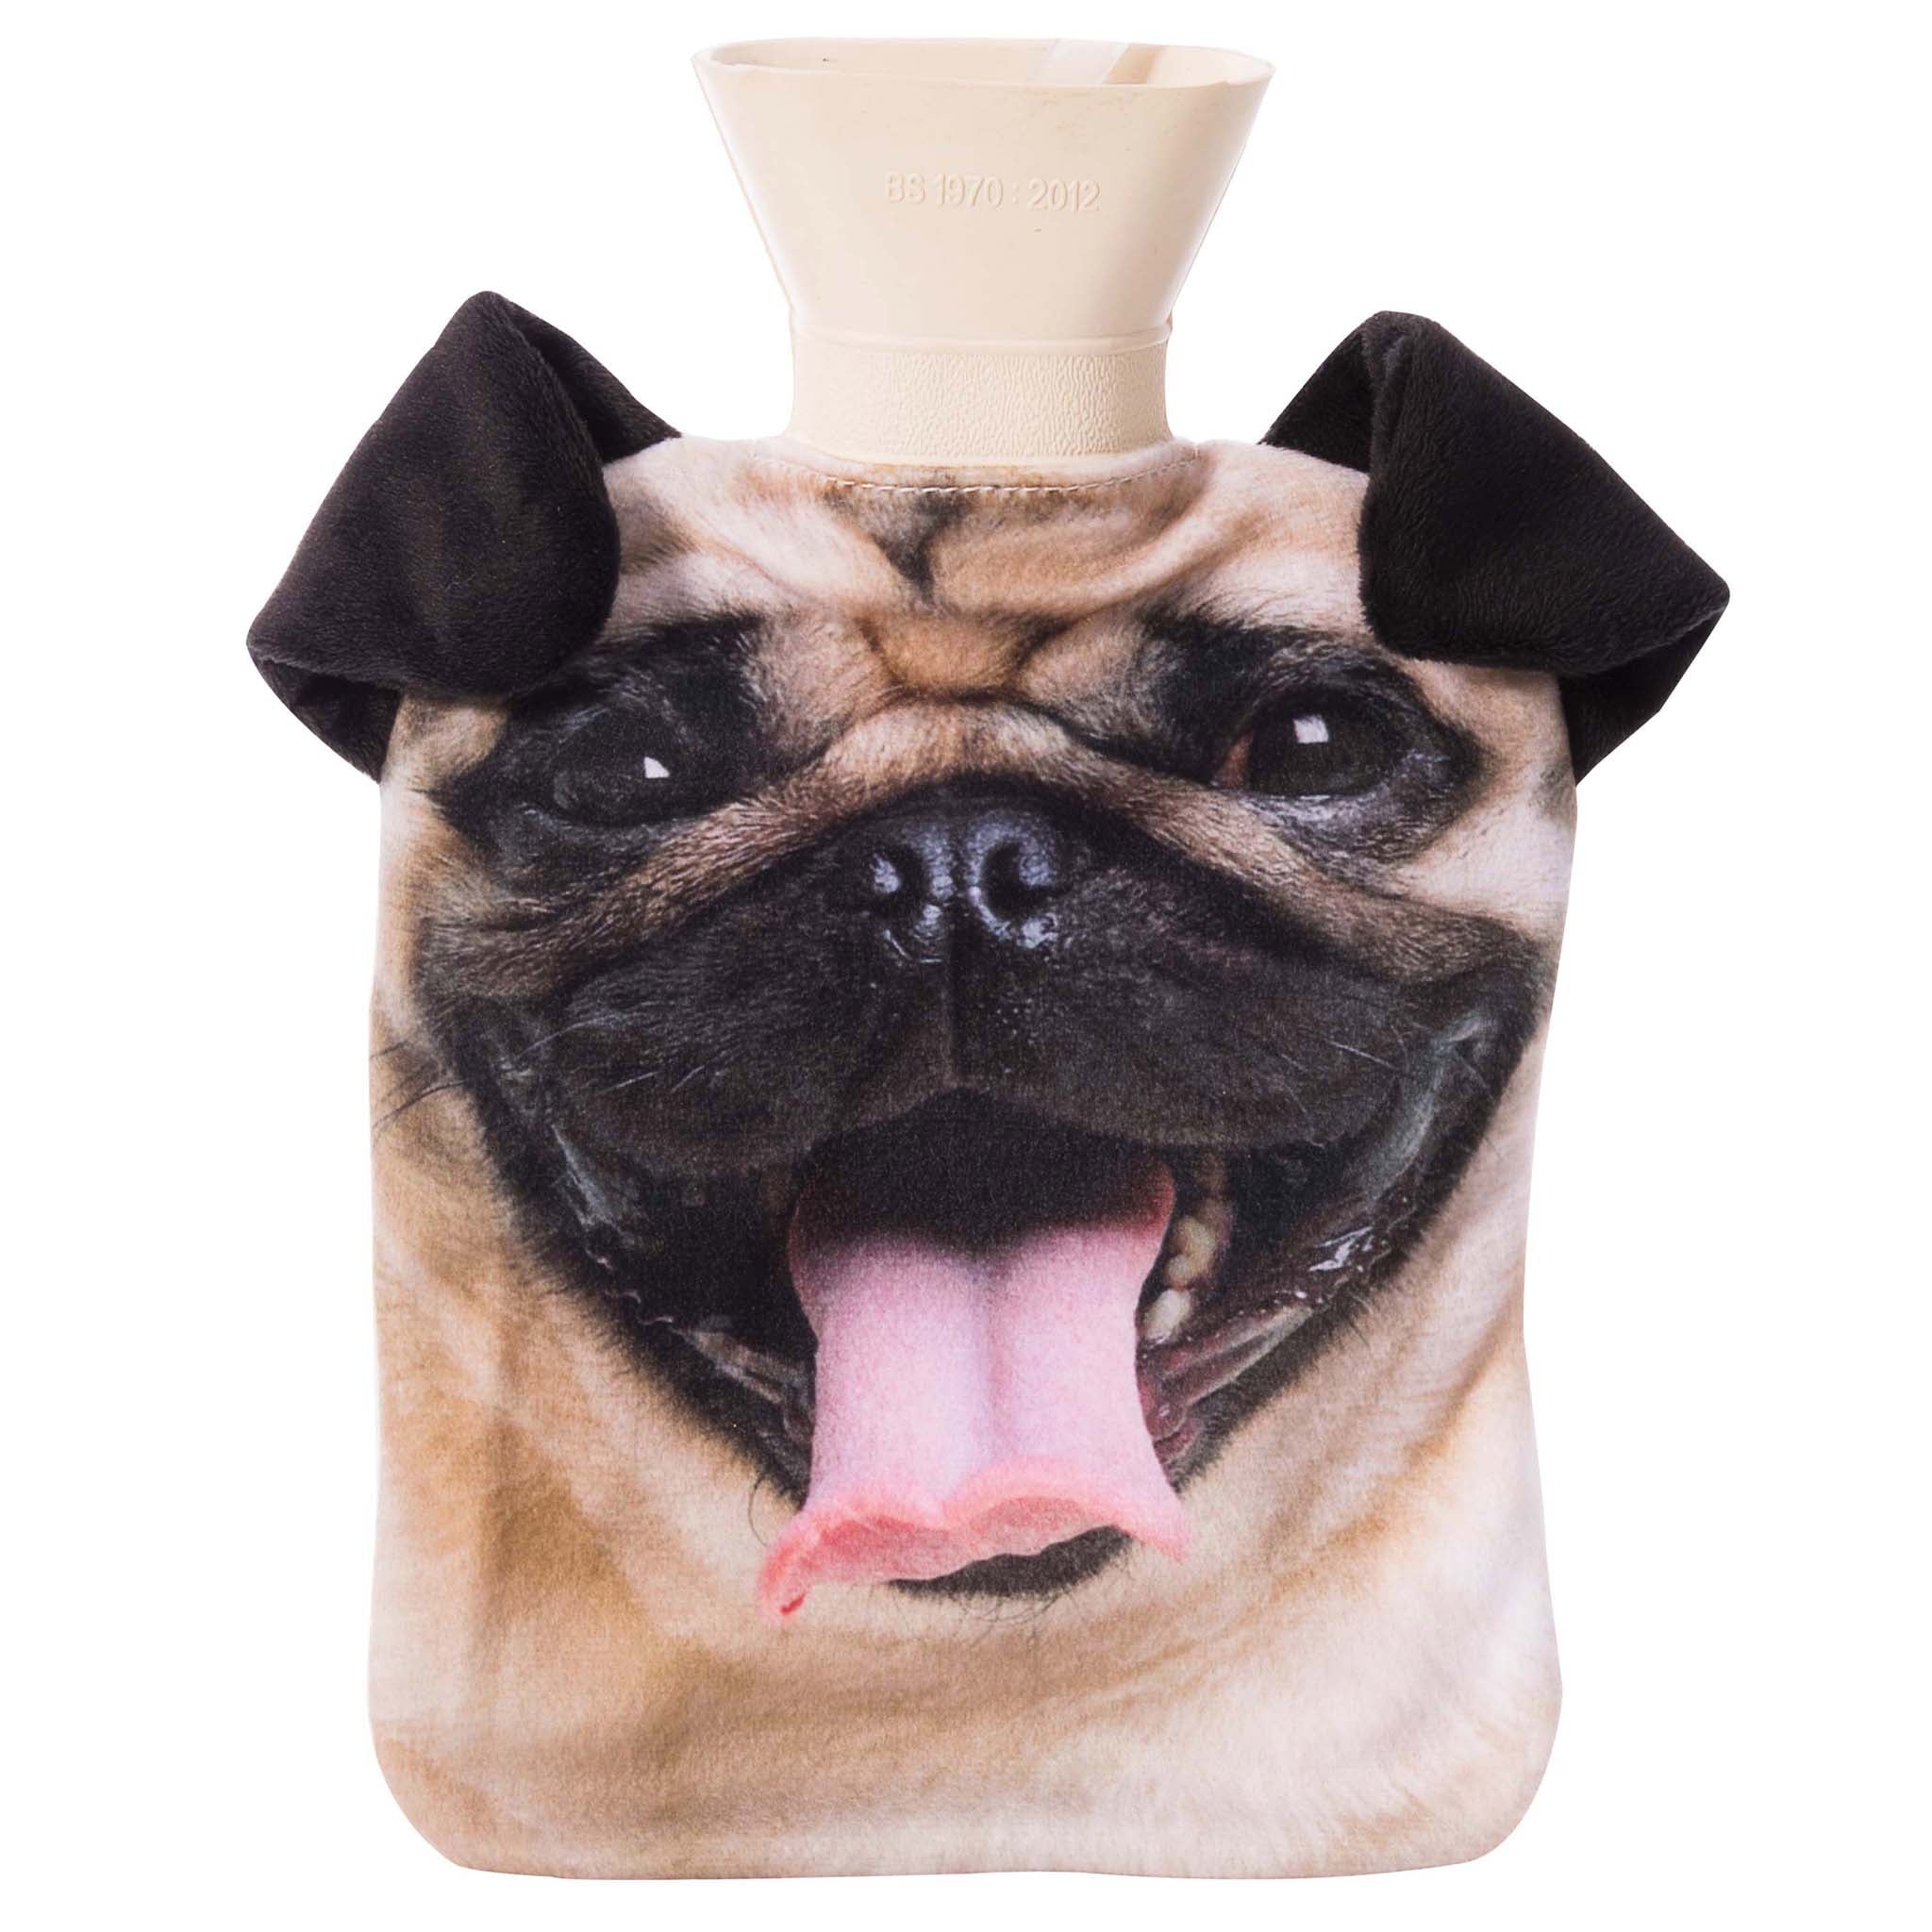 Pet Hotty Toys Not specified Pug 